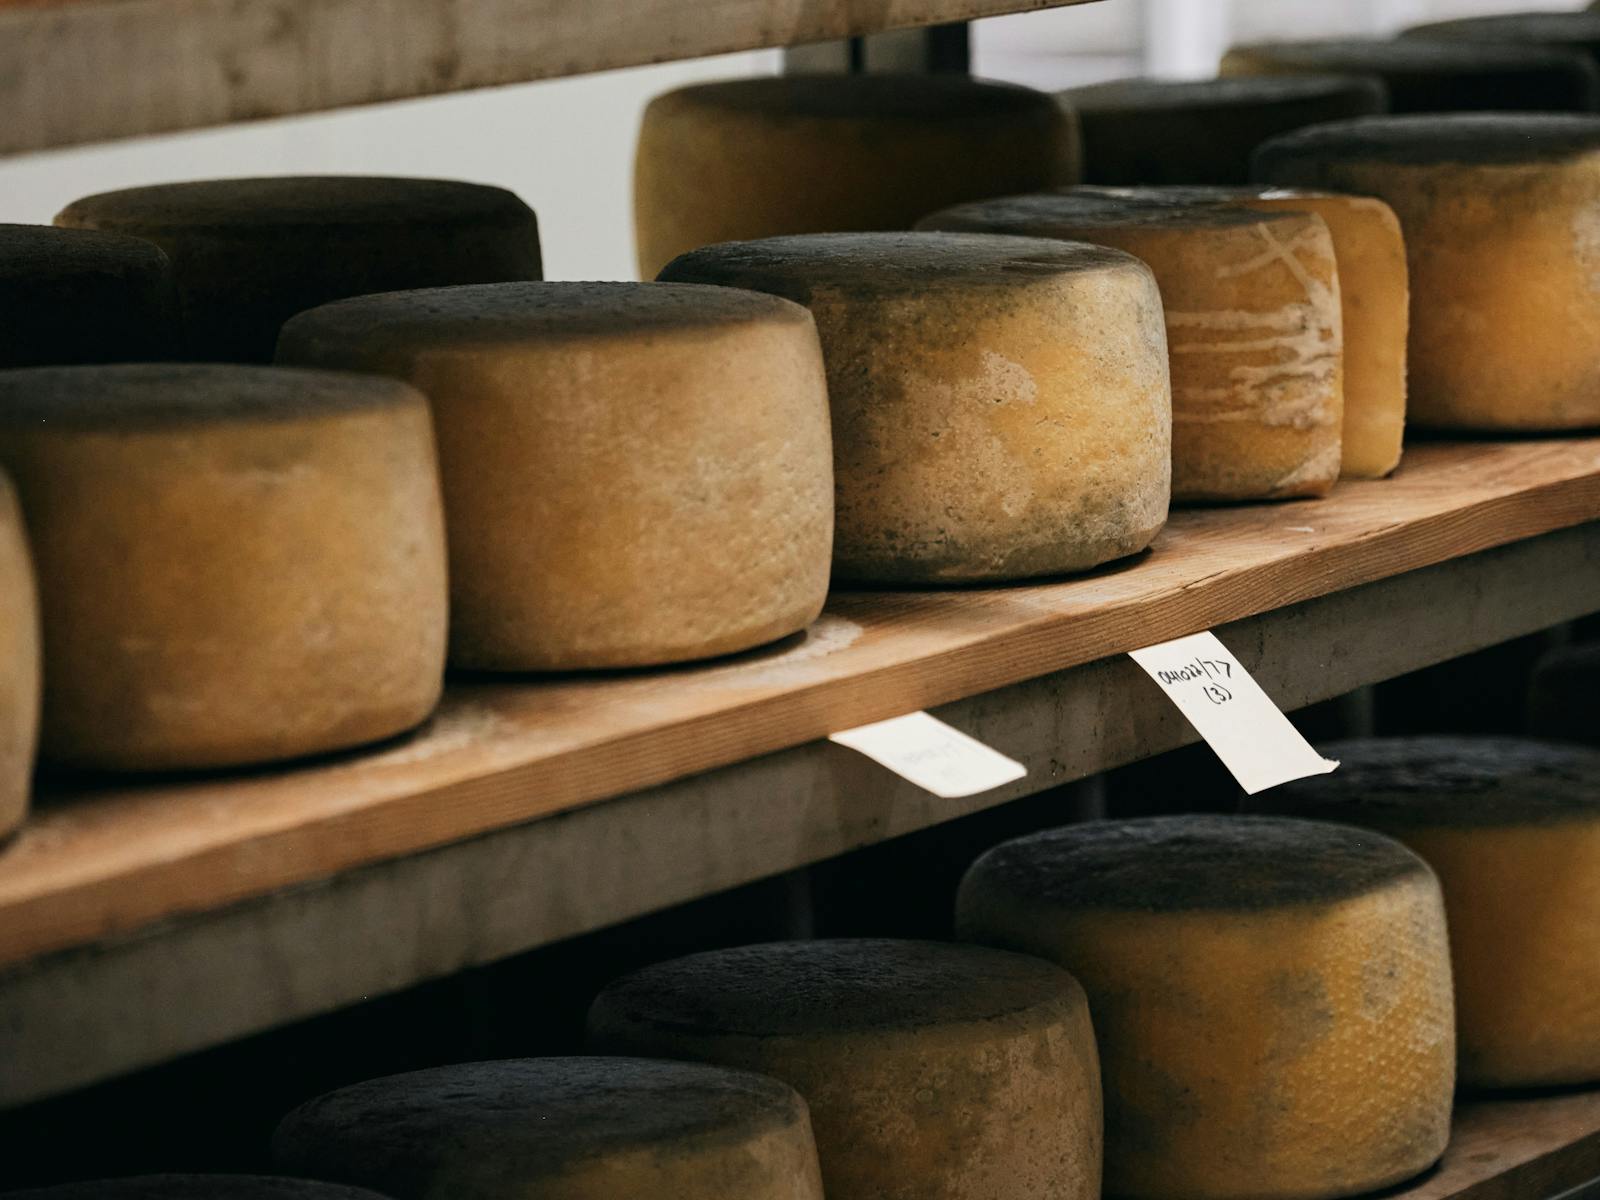 A selection of cheese on a shelf.